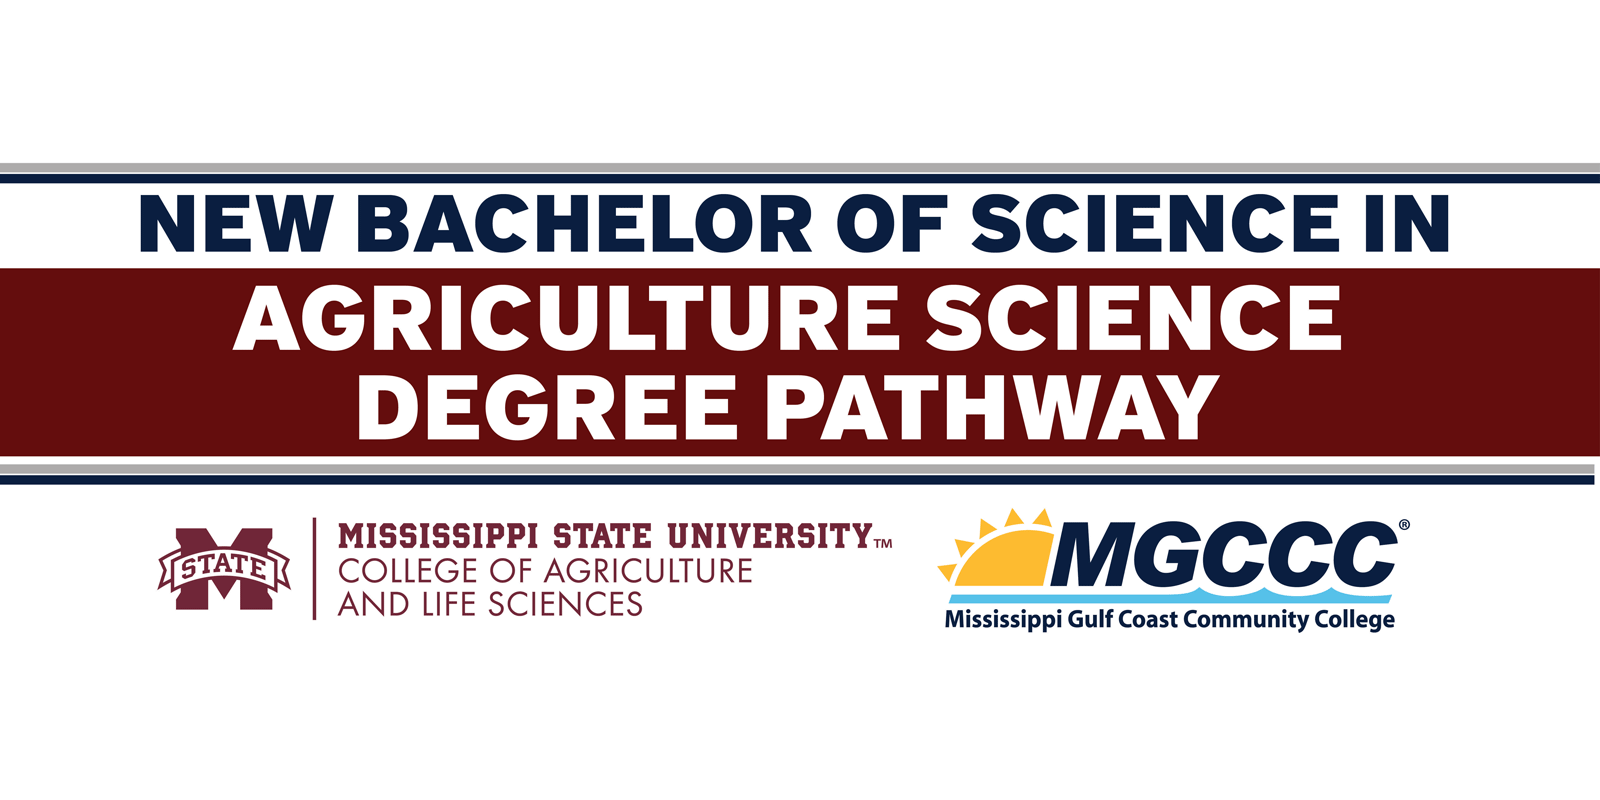 New Bachelor of Science in Agriculture Science Degree Pathway